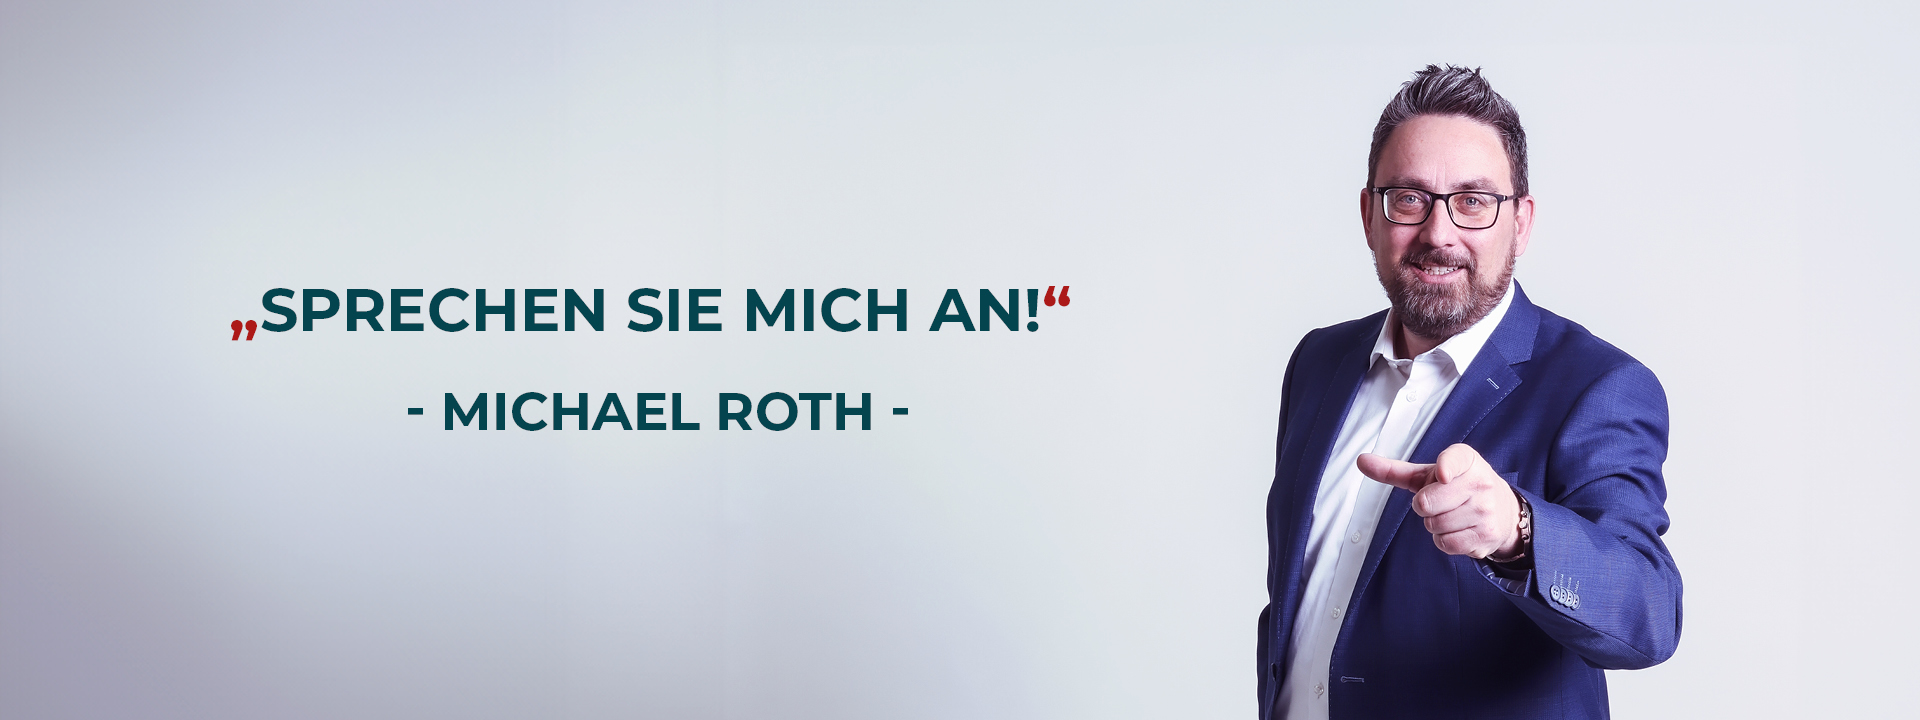 Sprechen Sie mich an, Michael Roth, rodicon, Termin, ManagedSecurity